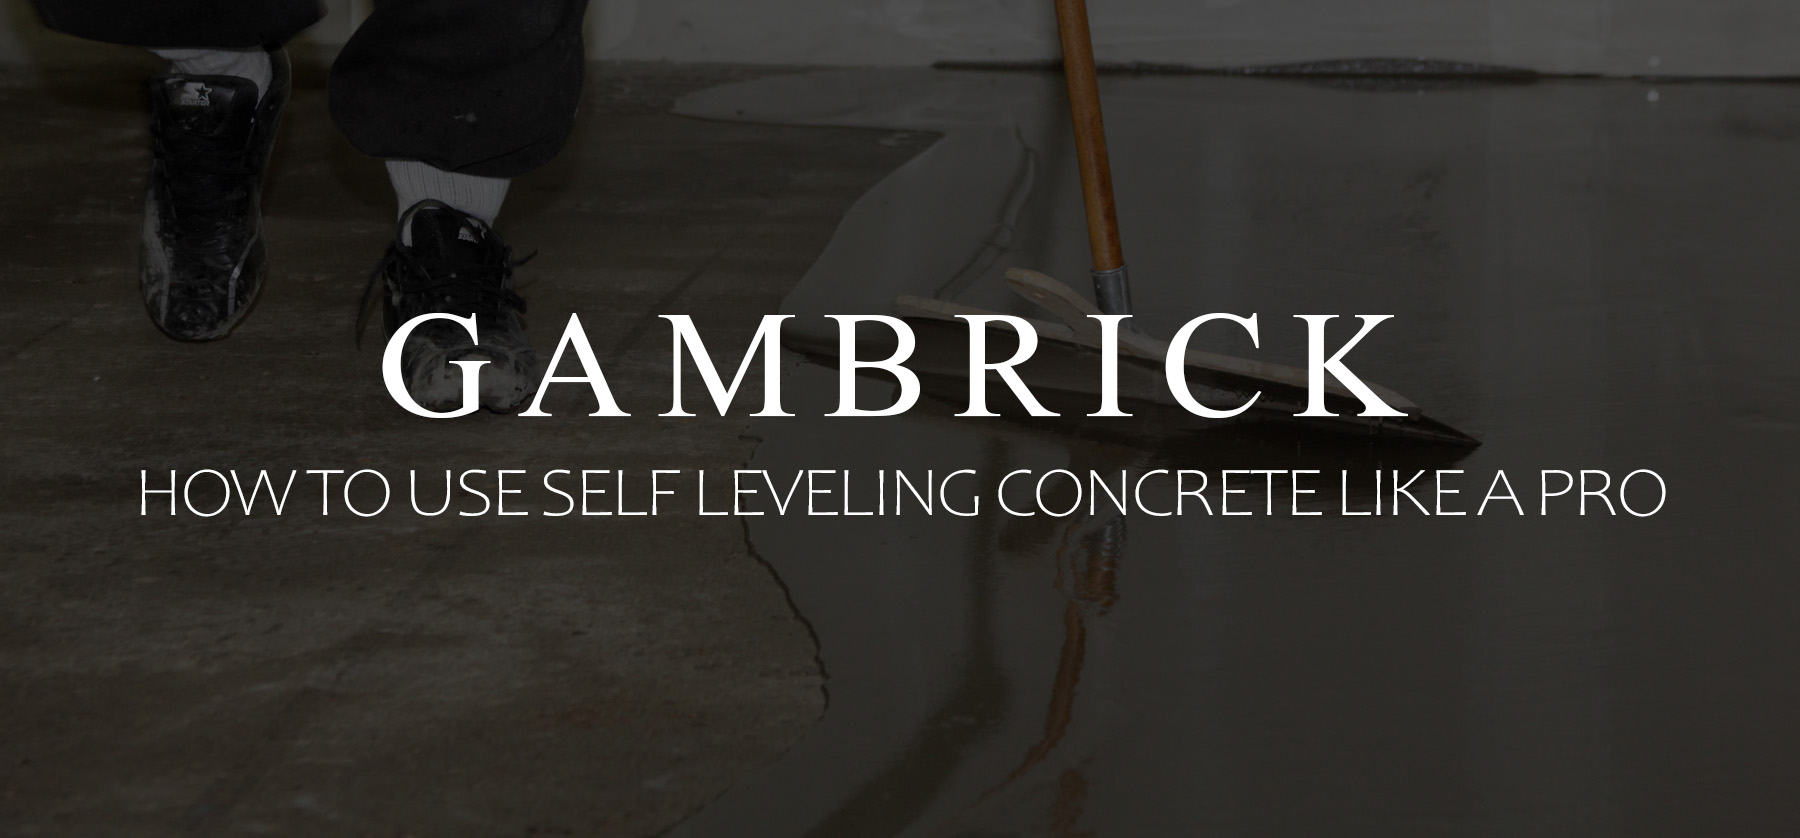 how to use self leveling concrete like a pro banner pic